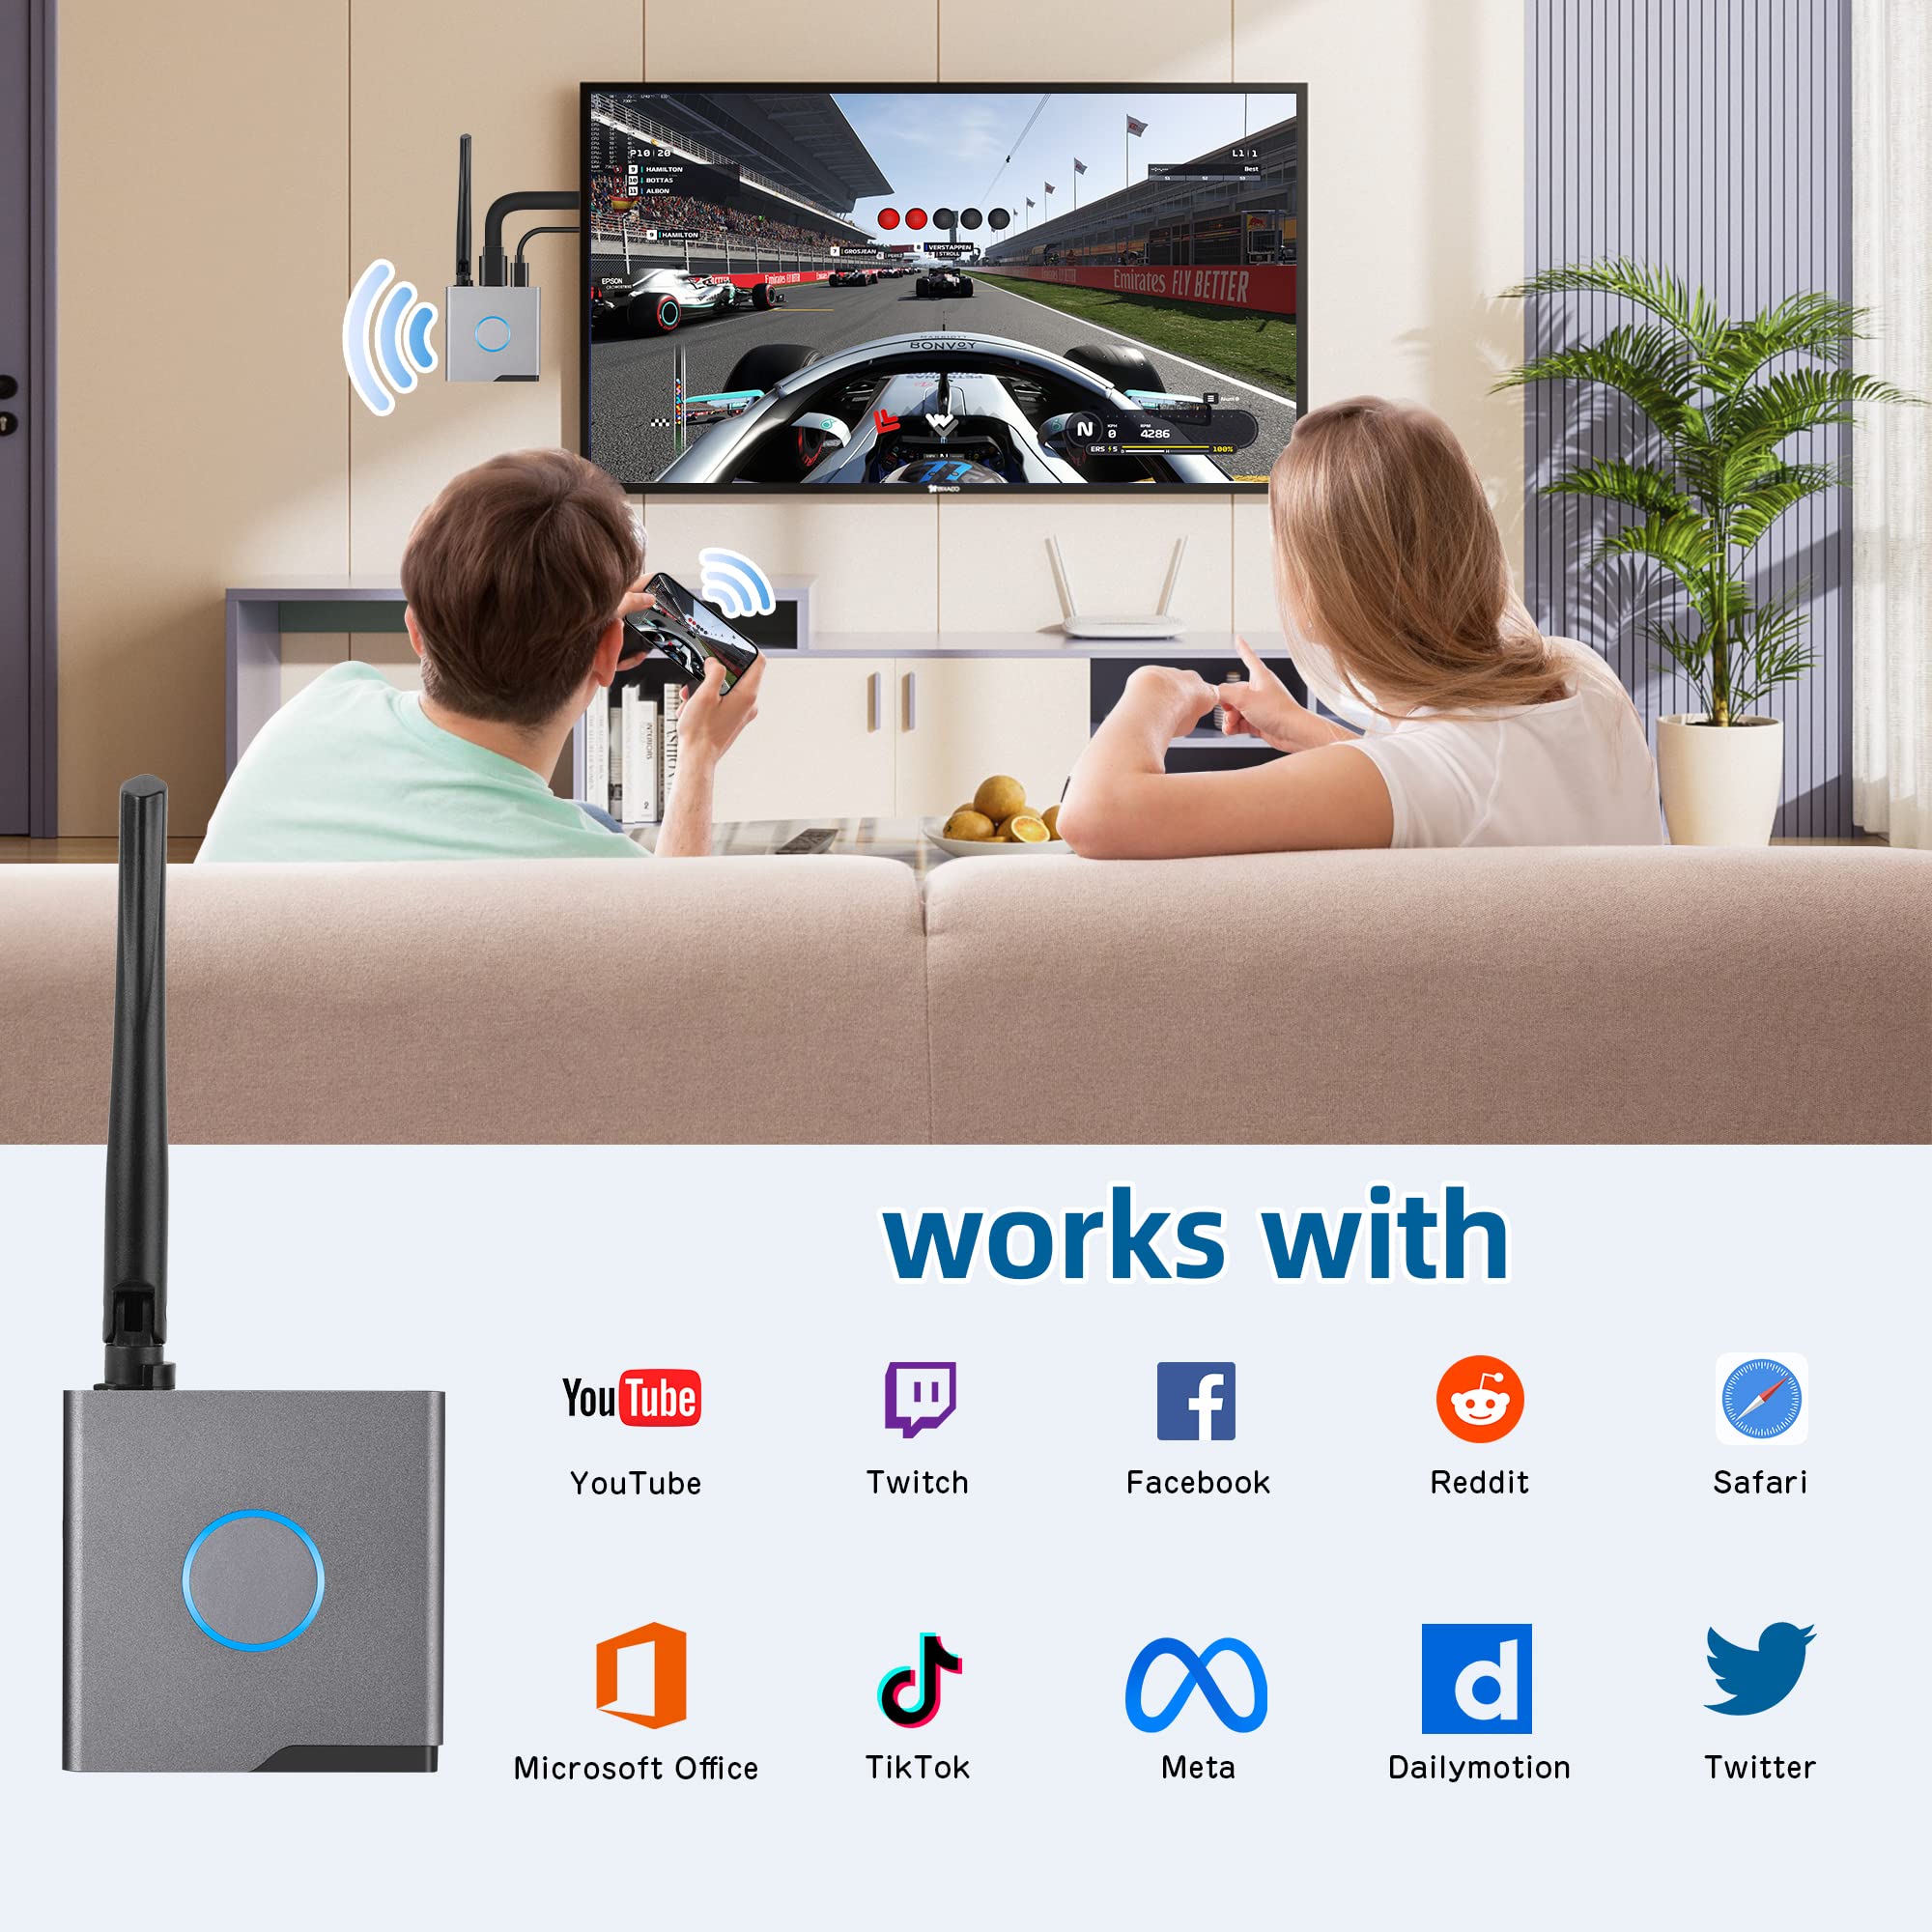 Wireless HDMI Display Dongle Adapter 4K, Wireless Receiver, Streaming Media Video/Audio/File HDMI Wireless Extender from Laptop, PC, Smartphone to HDTV Projector Monitor (Sliver) (Sliver)